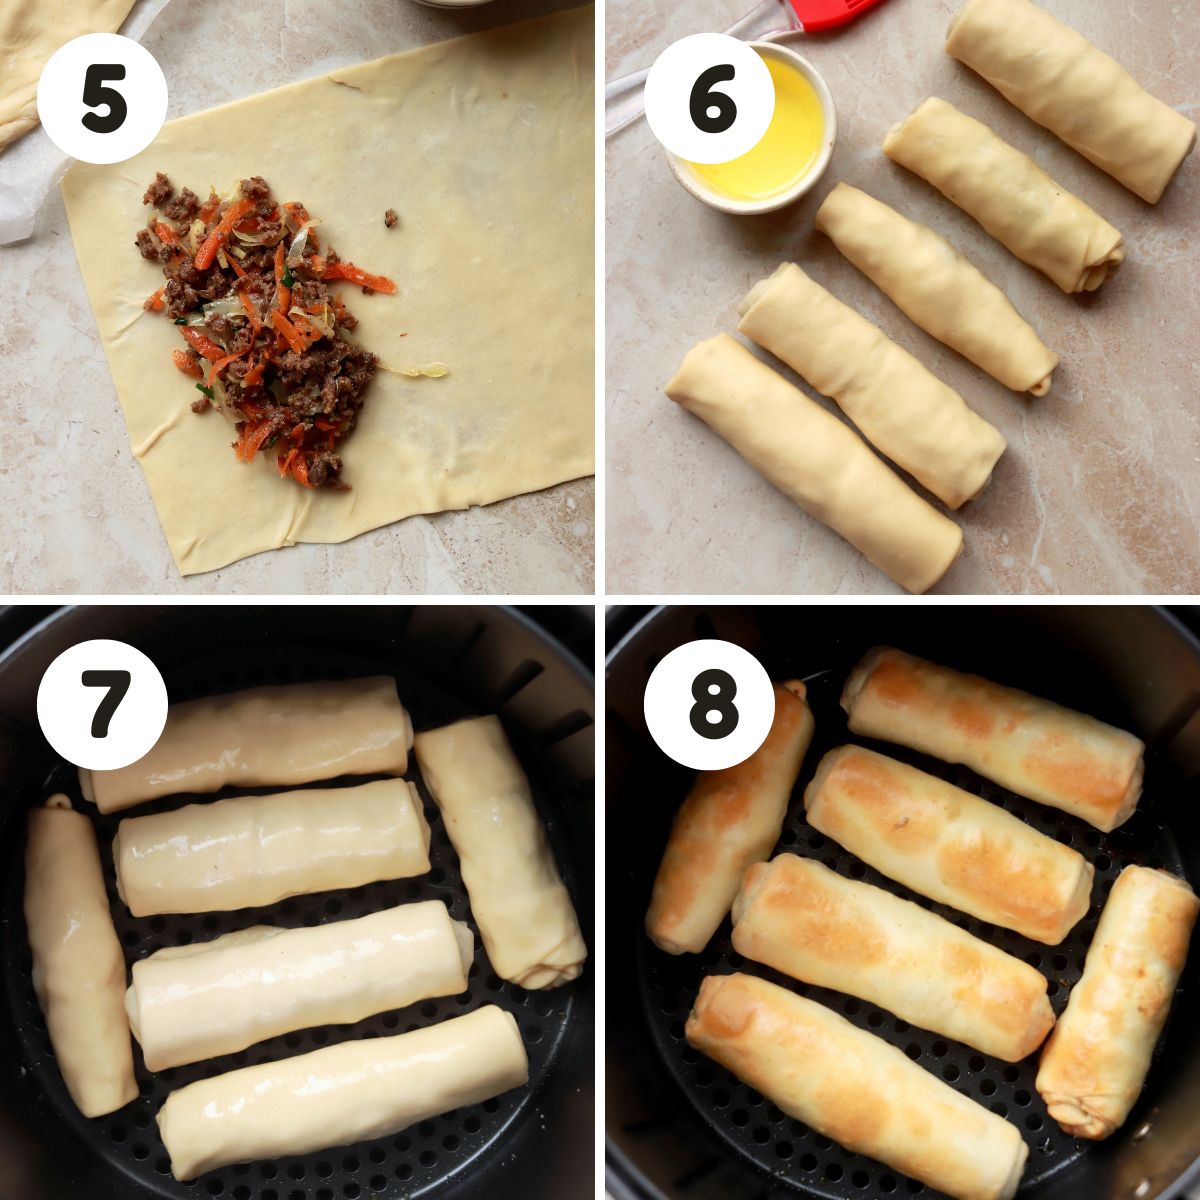 Steps to assemble and air fry the egg rolls.